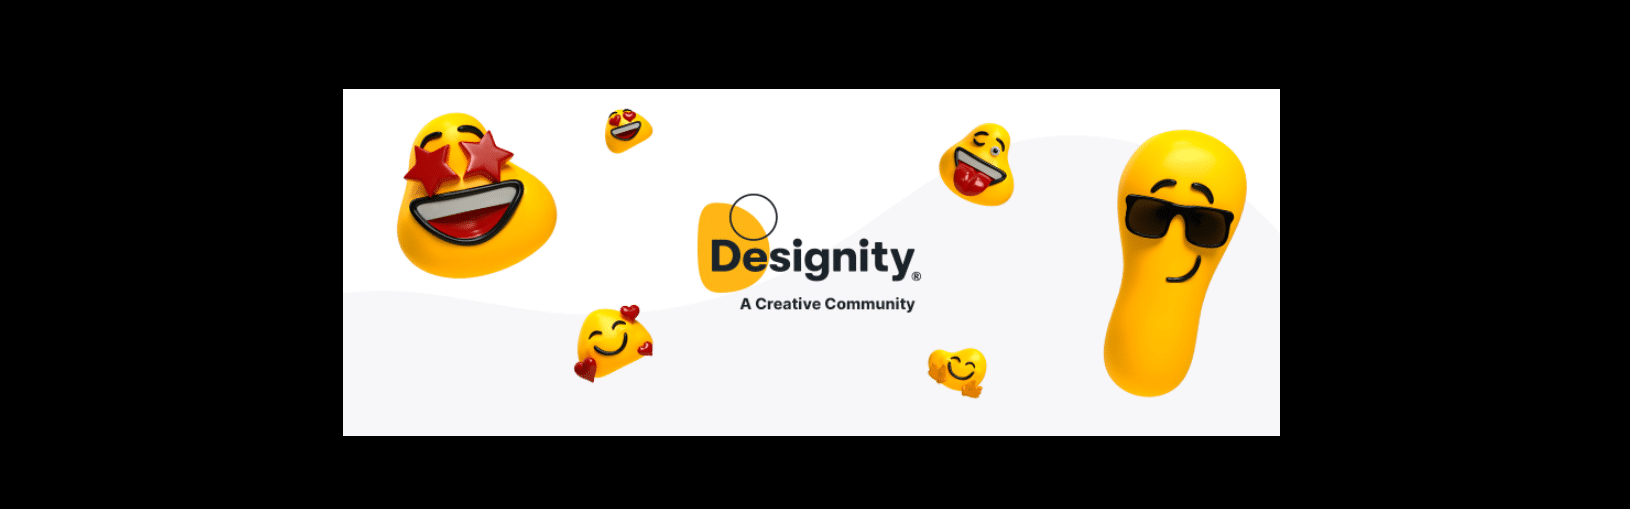 Discover Designity: Pros, Cons, and the Creative Journey